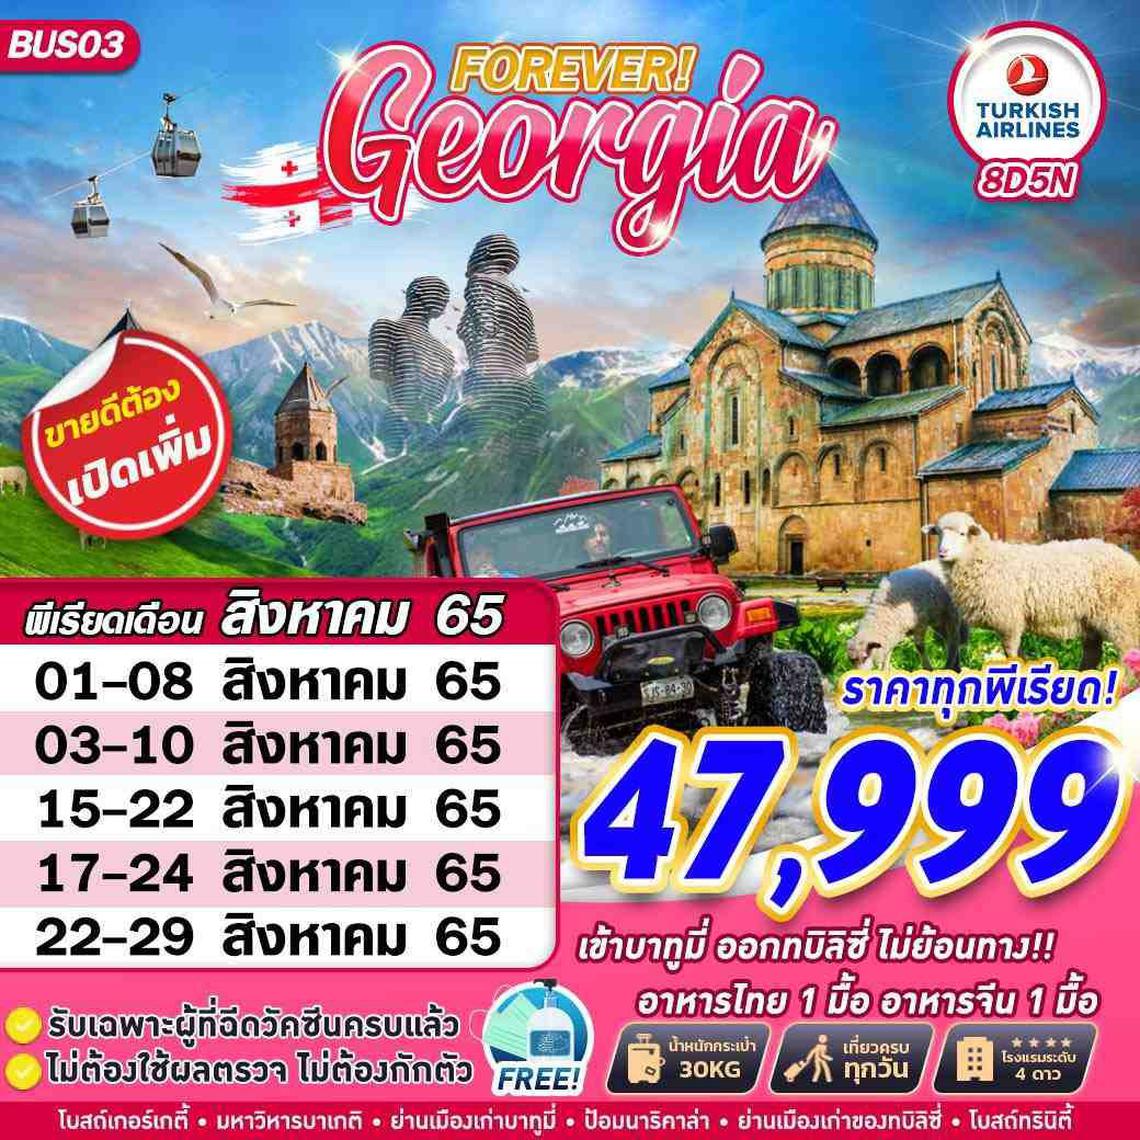 BUS03 GRAND GEORGIA FOREVER BY TK 